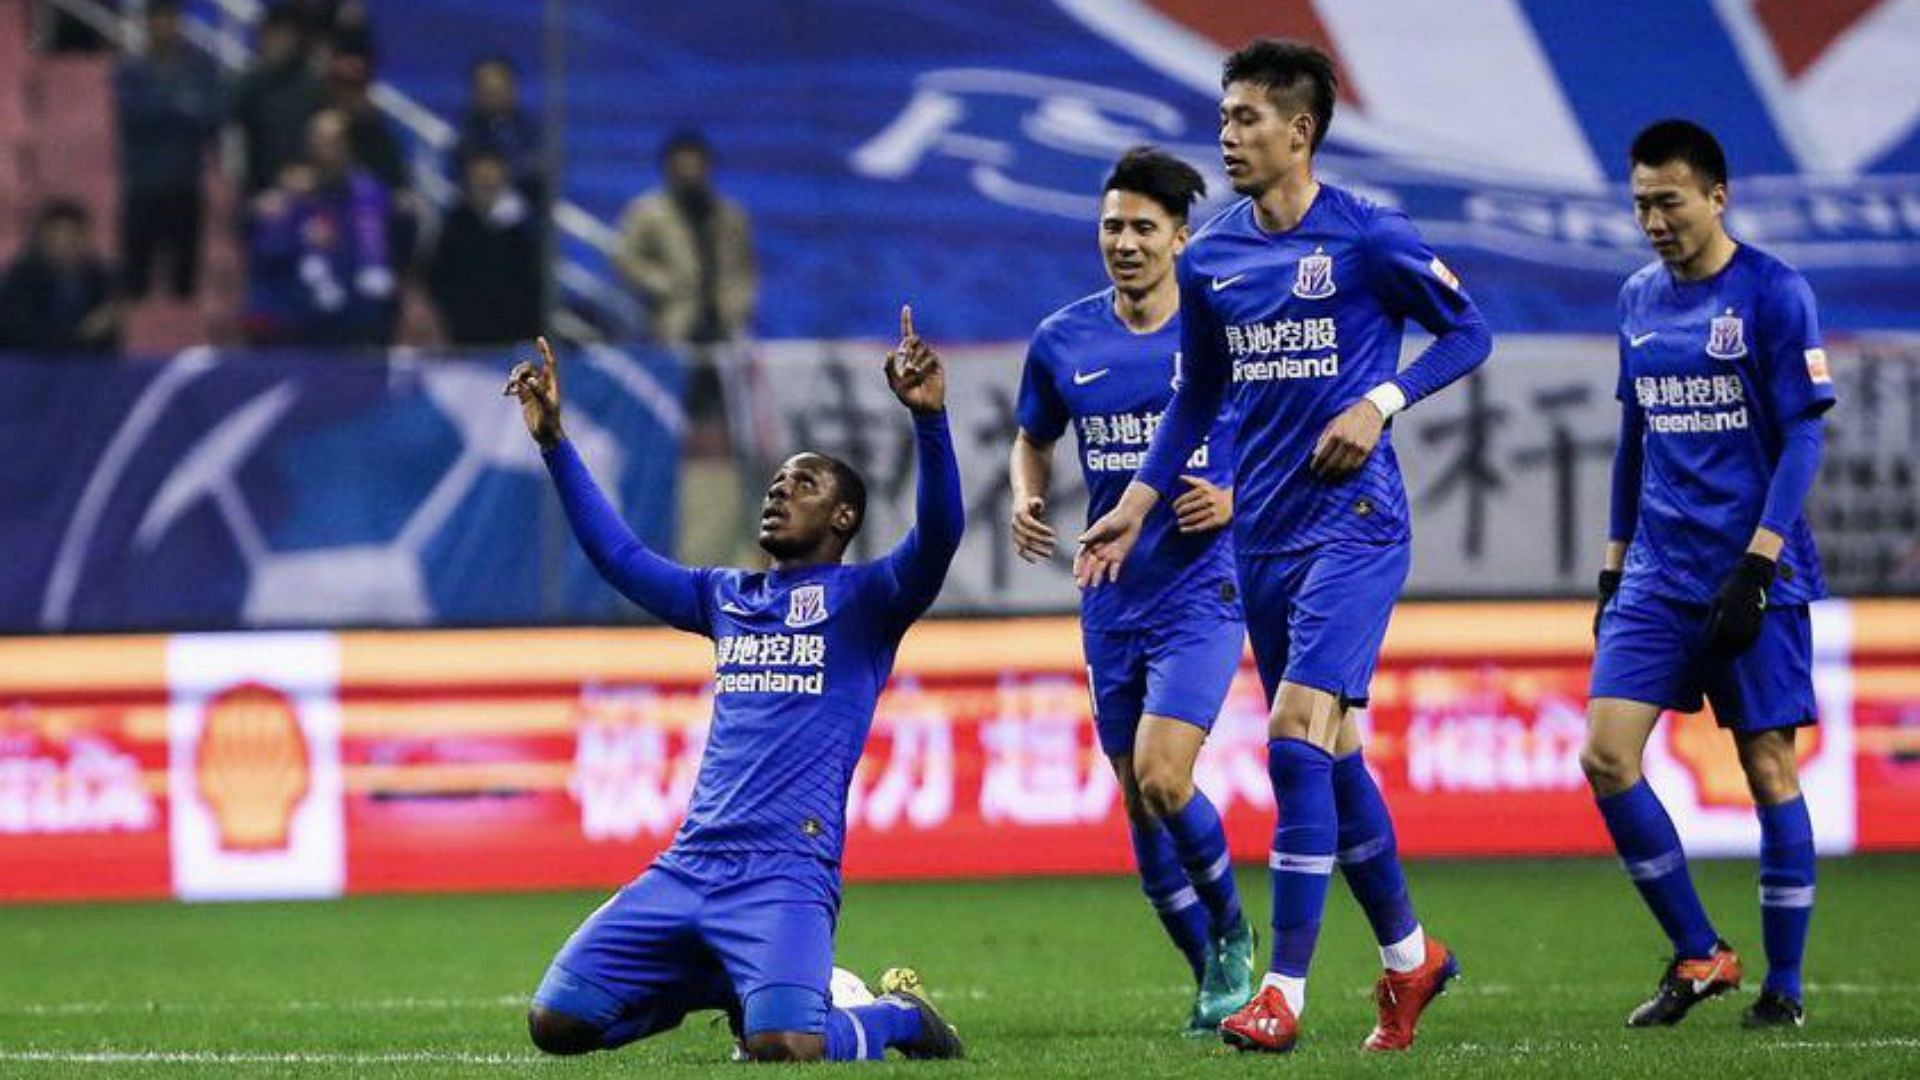 Shanghai Shenhua will be looking to keep their unbeaten run intact in the Chinese Super League